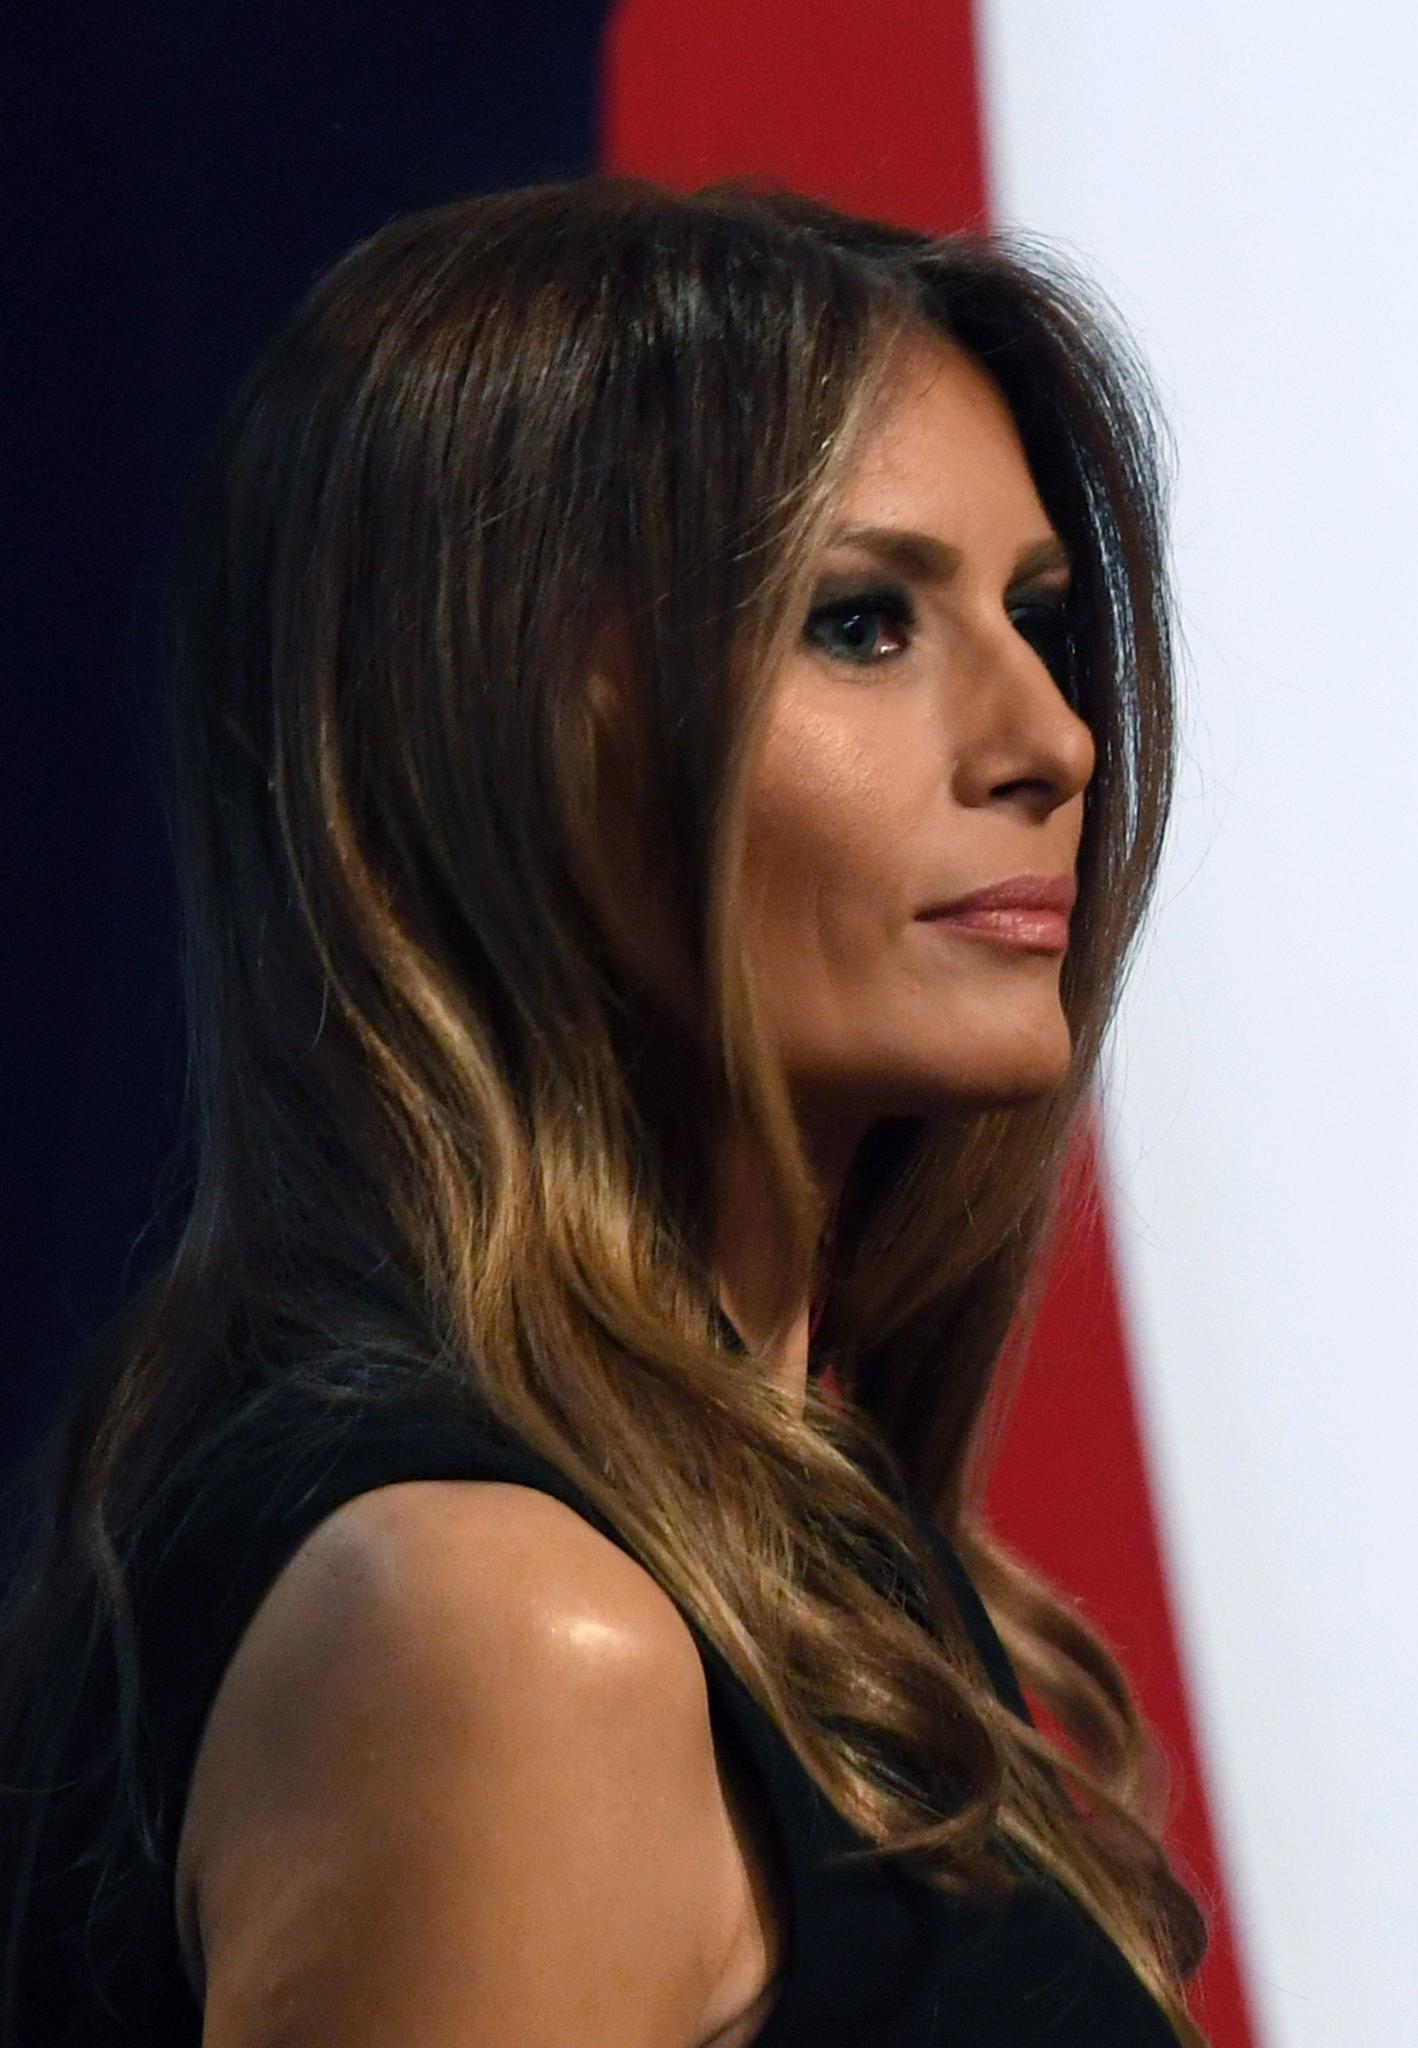 Melania Trump makes direct appeal to women in Philly suburbs - The